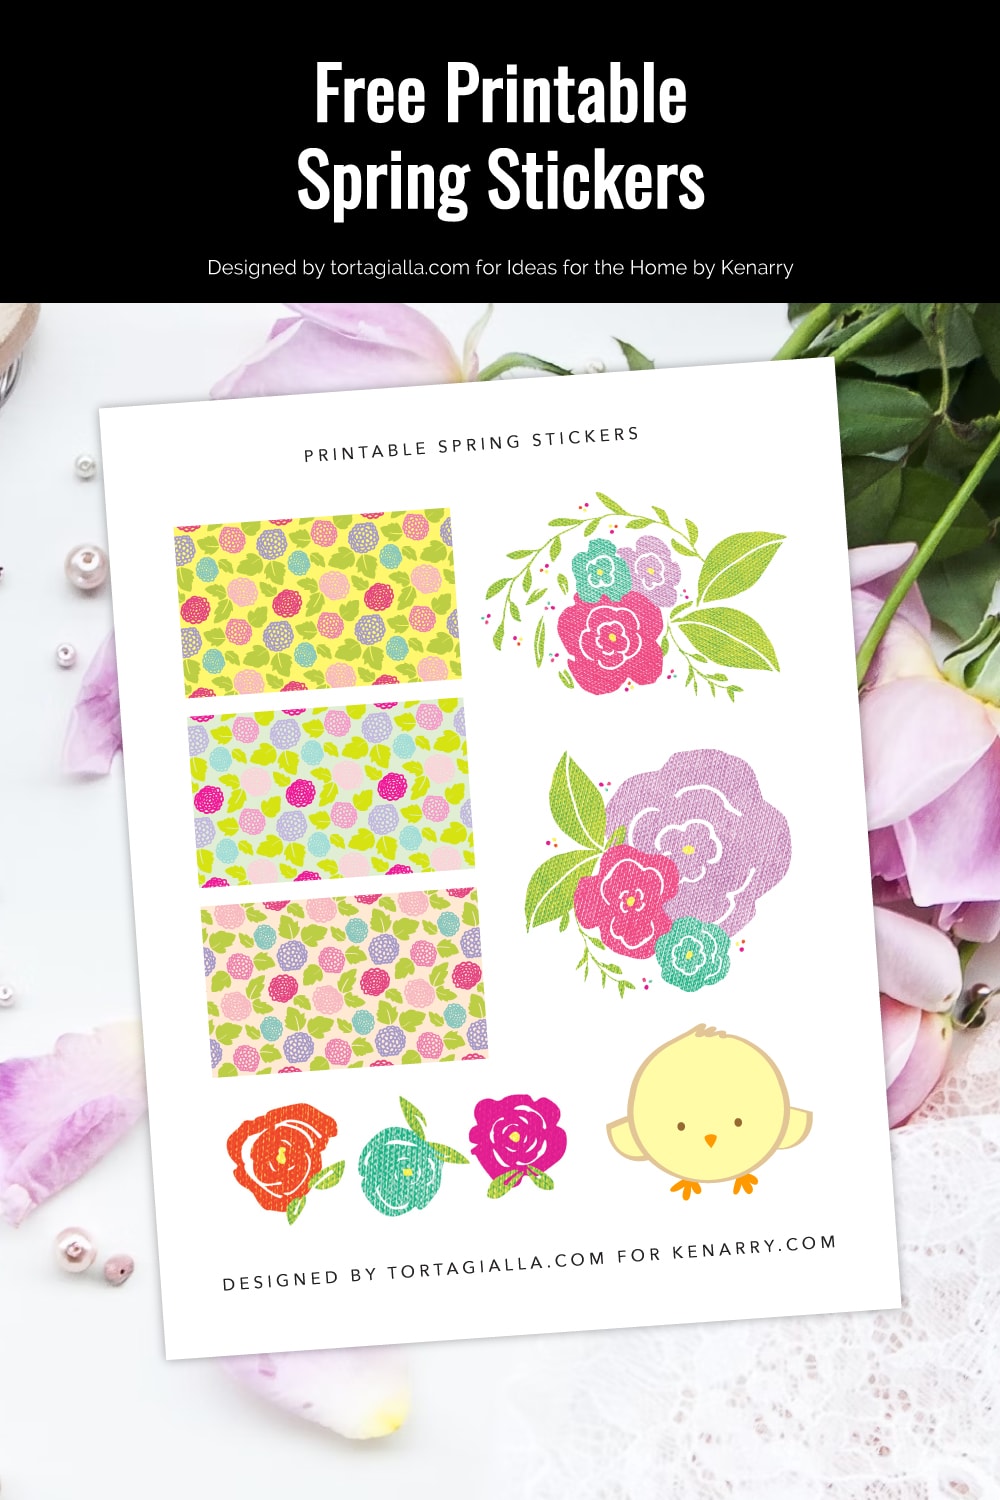 Preview of spring stickers printable page on top of white desk with pink roses and petals with decorative pearls and lace underneath.